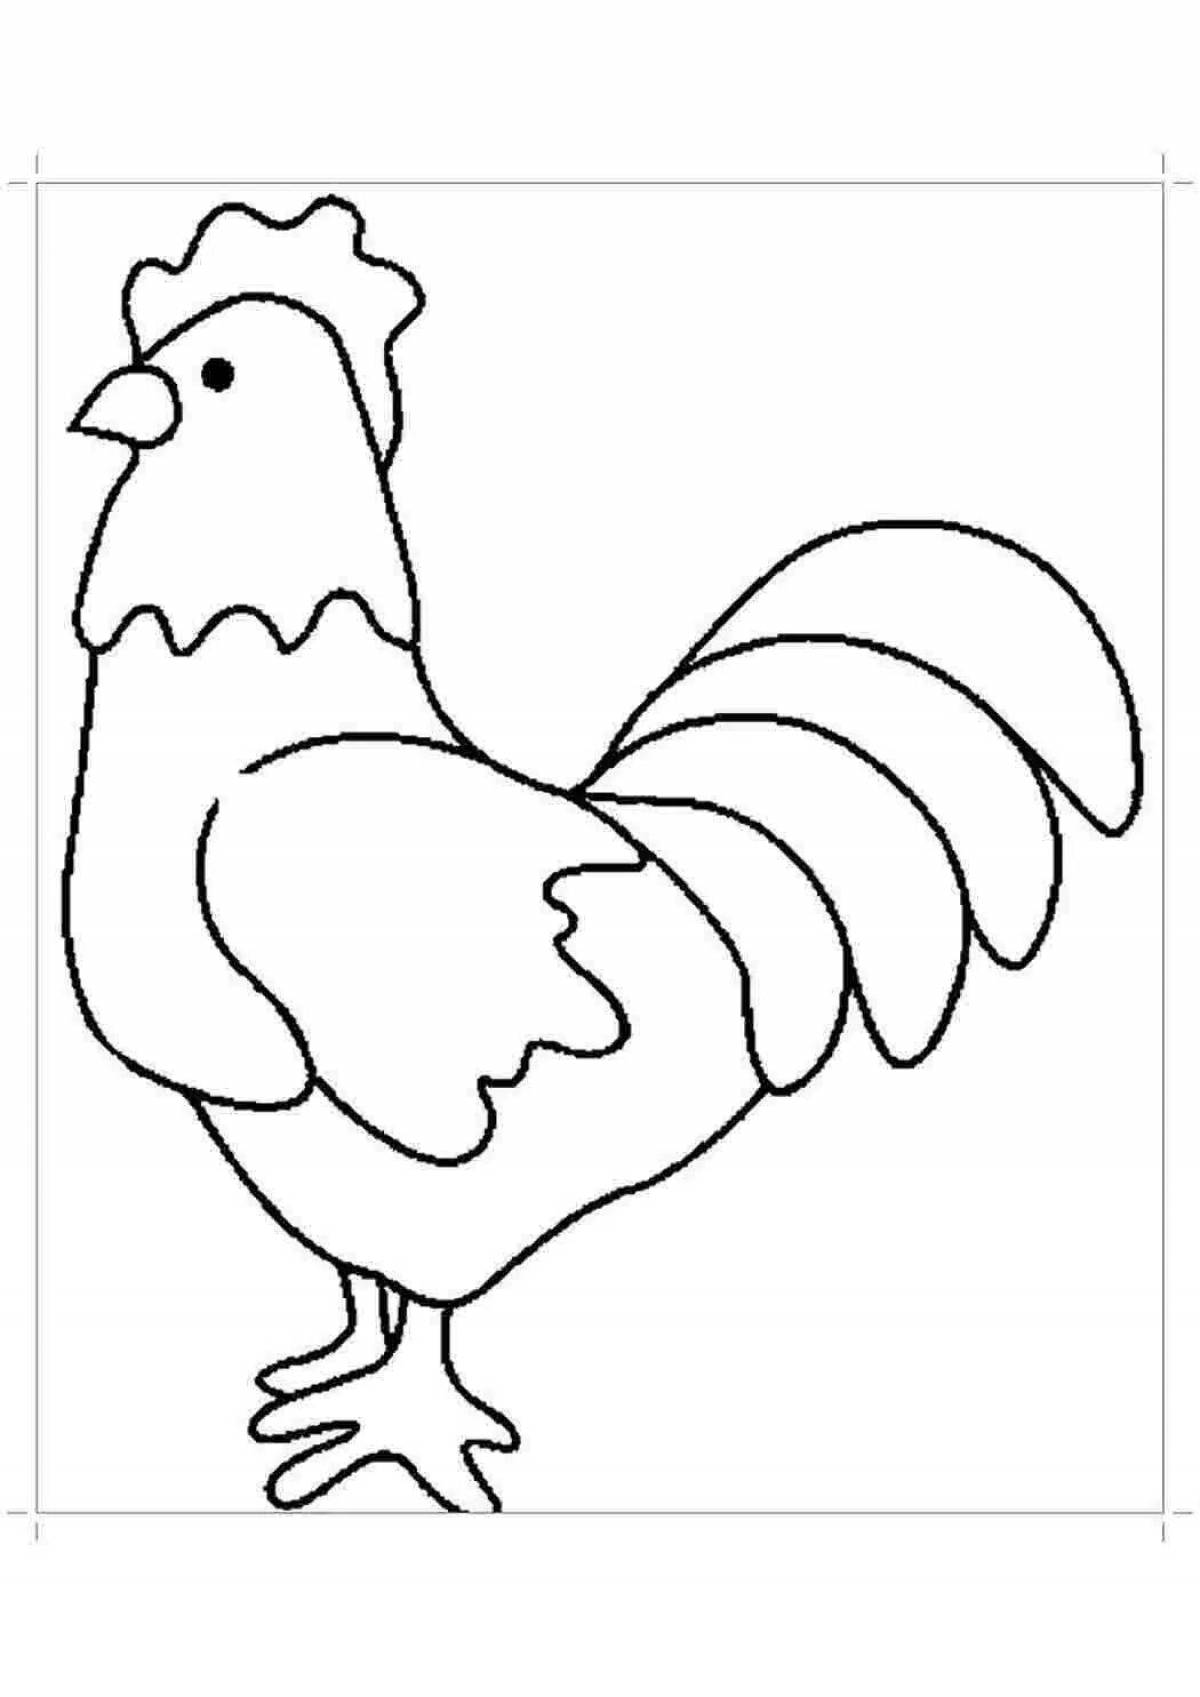 Coloring cute rooster for children 3-4 years old